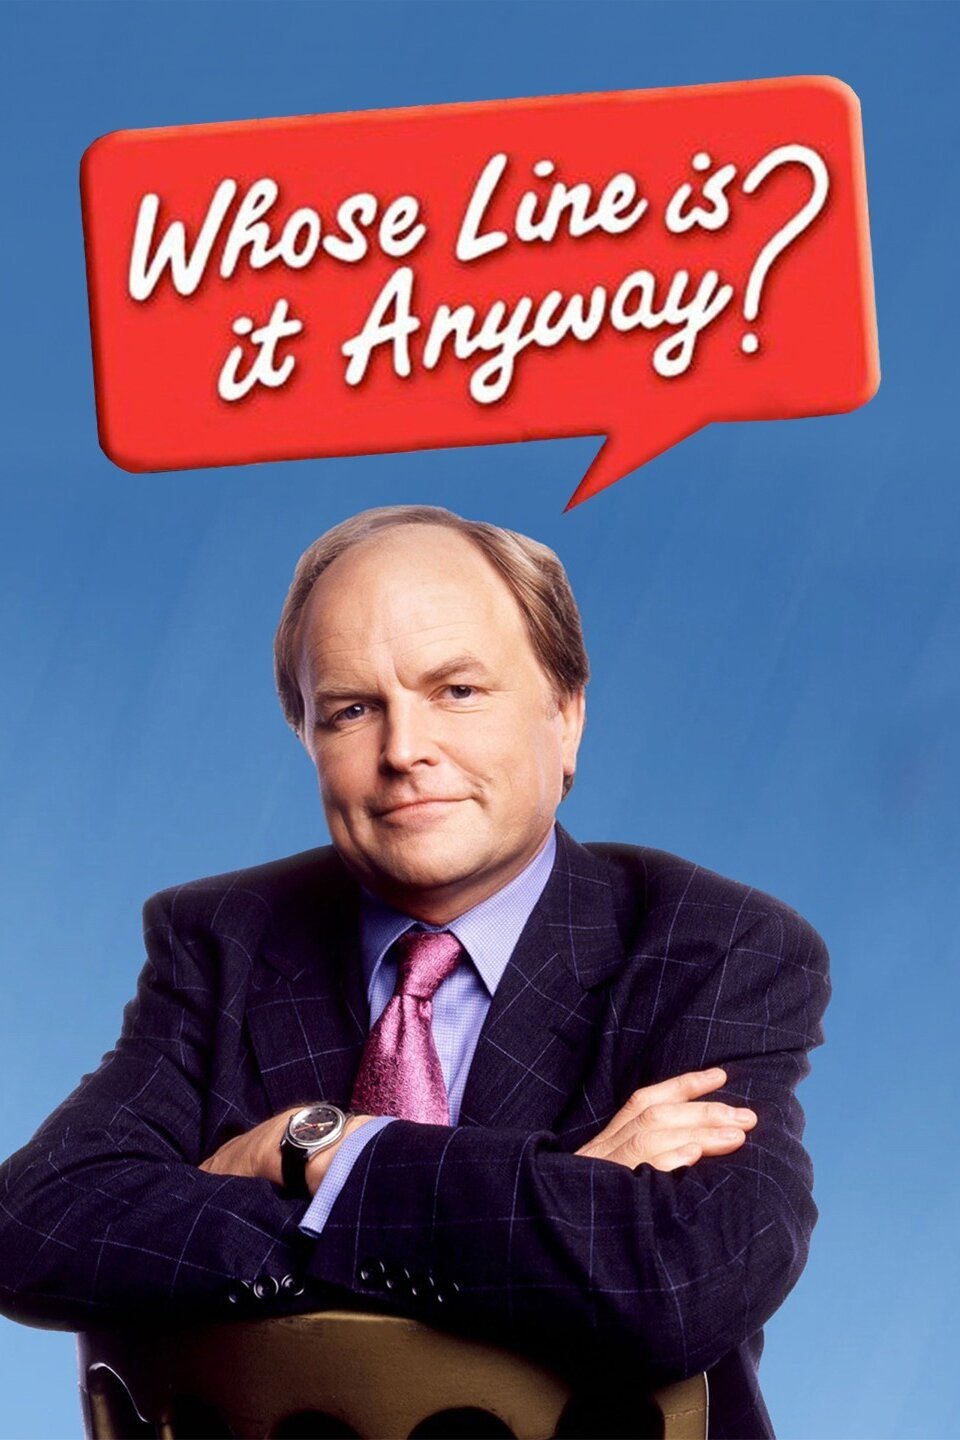 Watch Whose Line Is It Anyway? - S2:E15 Whose Line Is It Anyway? (1990 - What Channel Is Whose Line Is It Anyway On